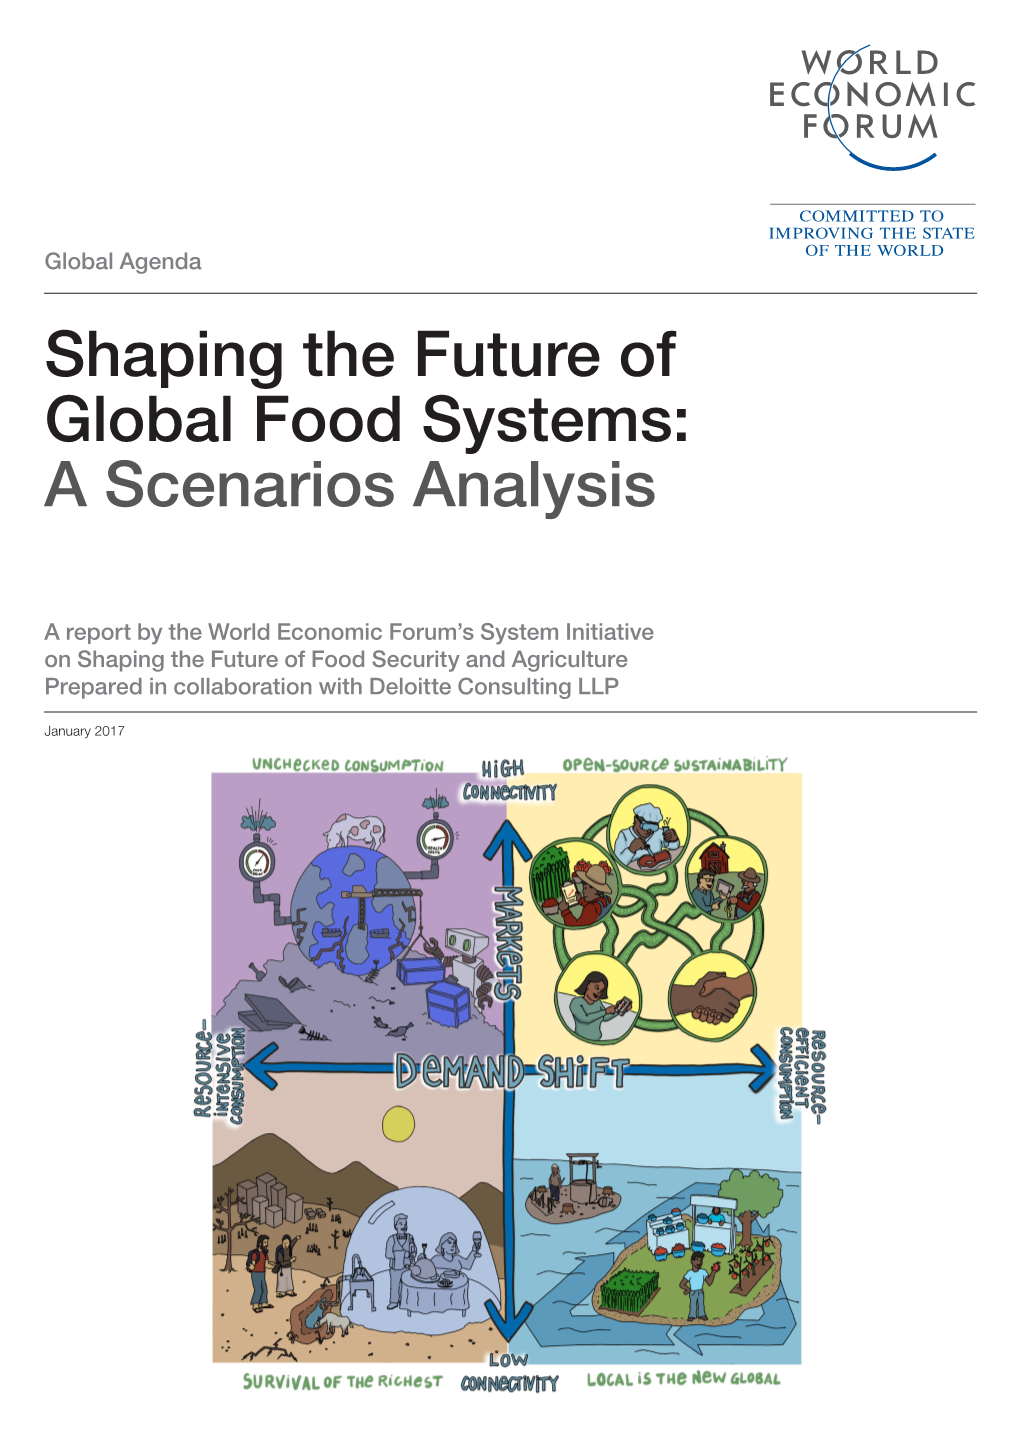 Shaping the Future of Global Food Systems: a Scenarios Analysis